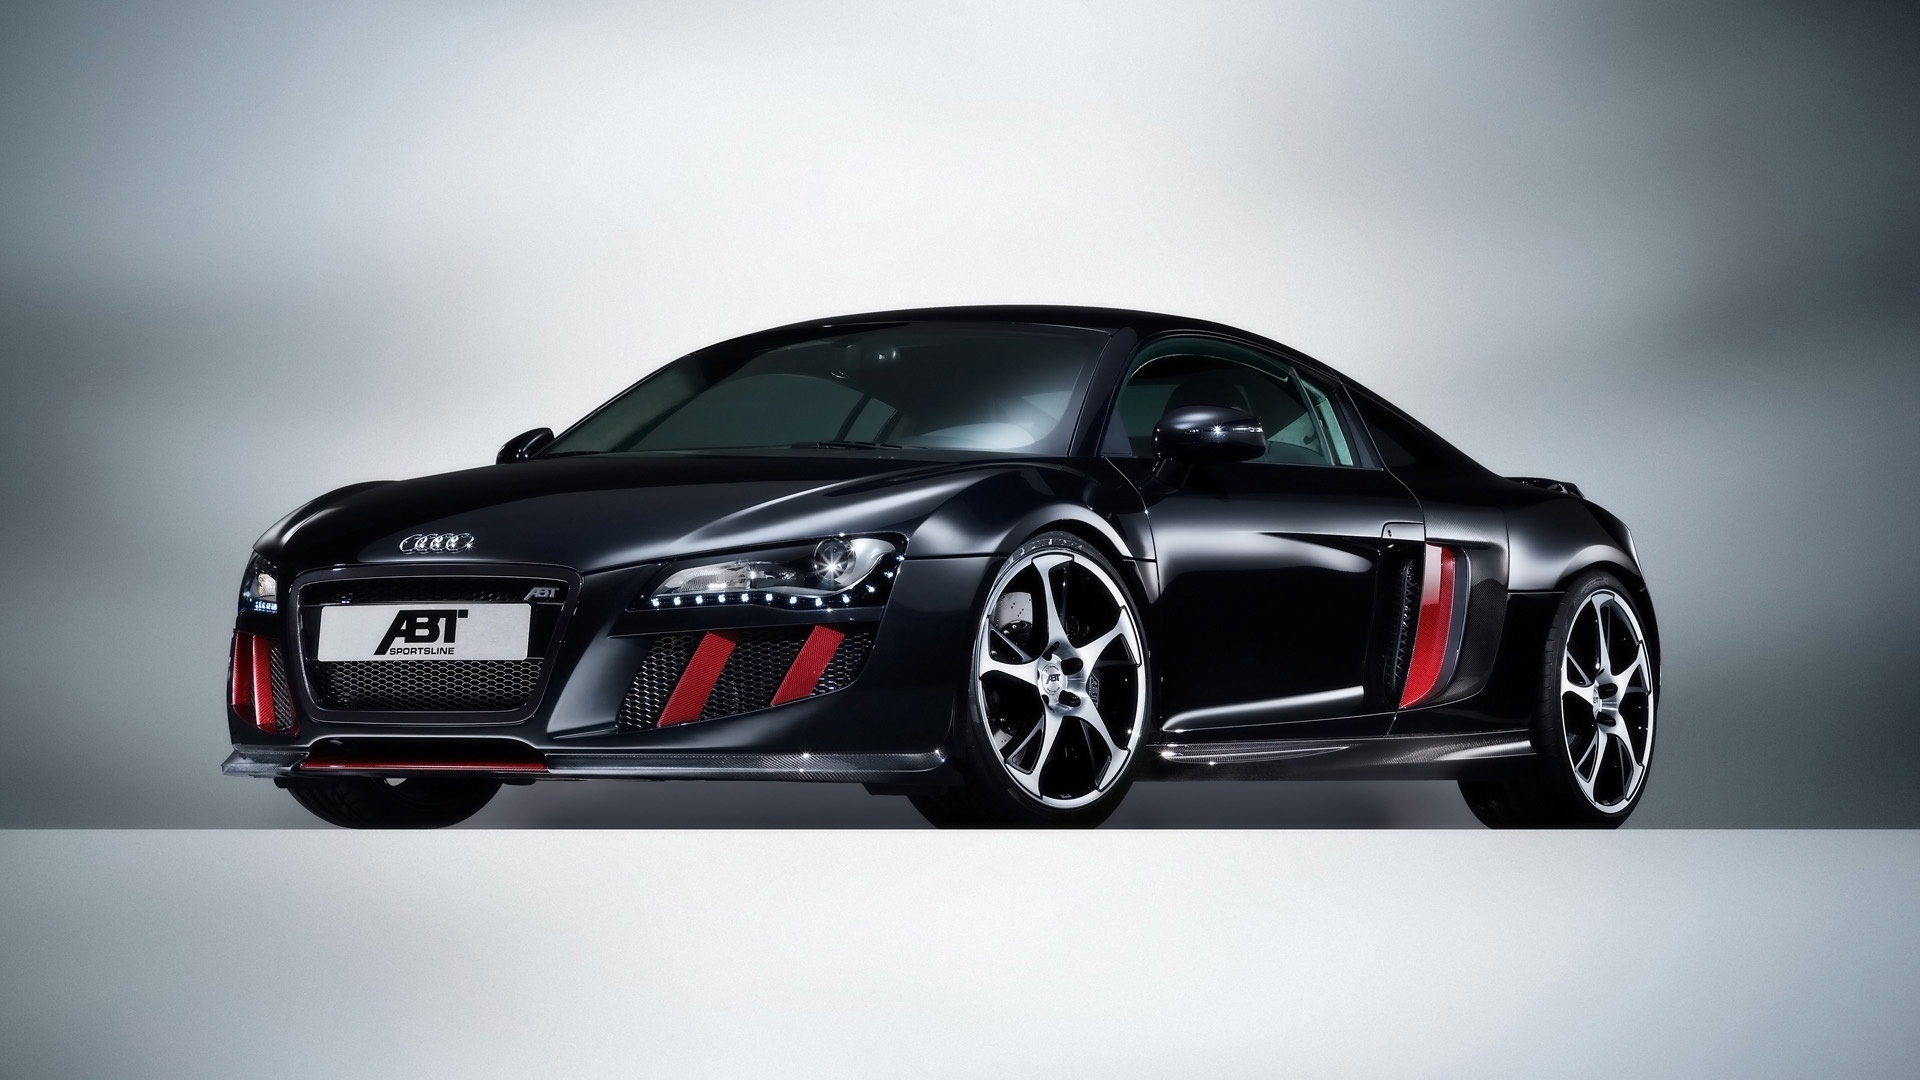 2008 Abt Audi R8 - Front Angle Lights for 1920 x 1080 HDTV 1080p resolution